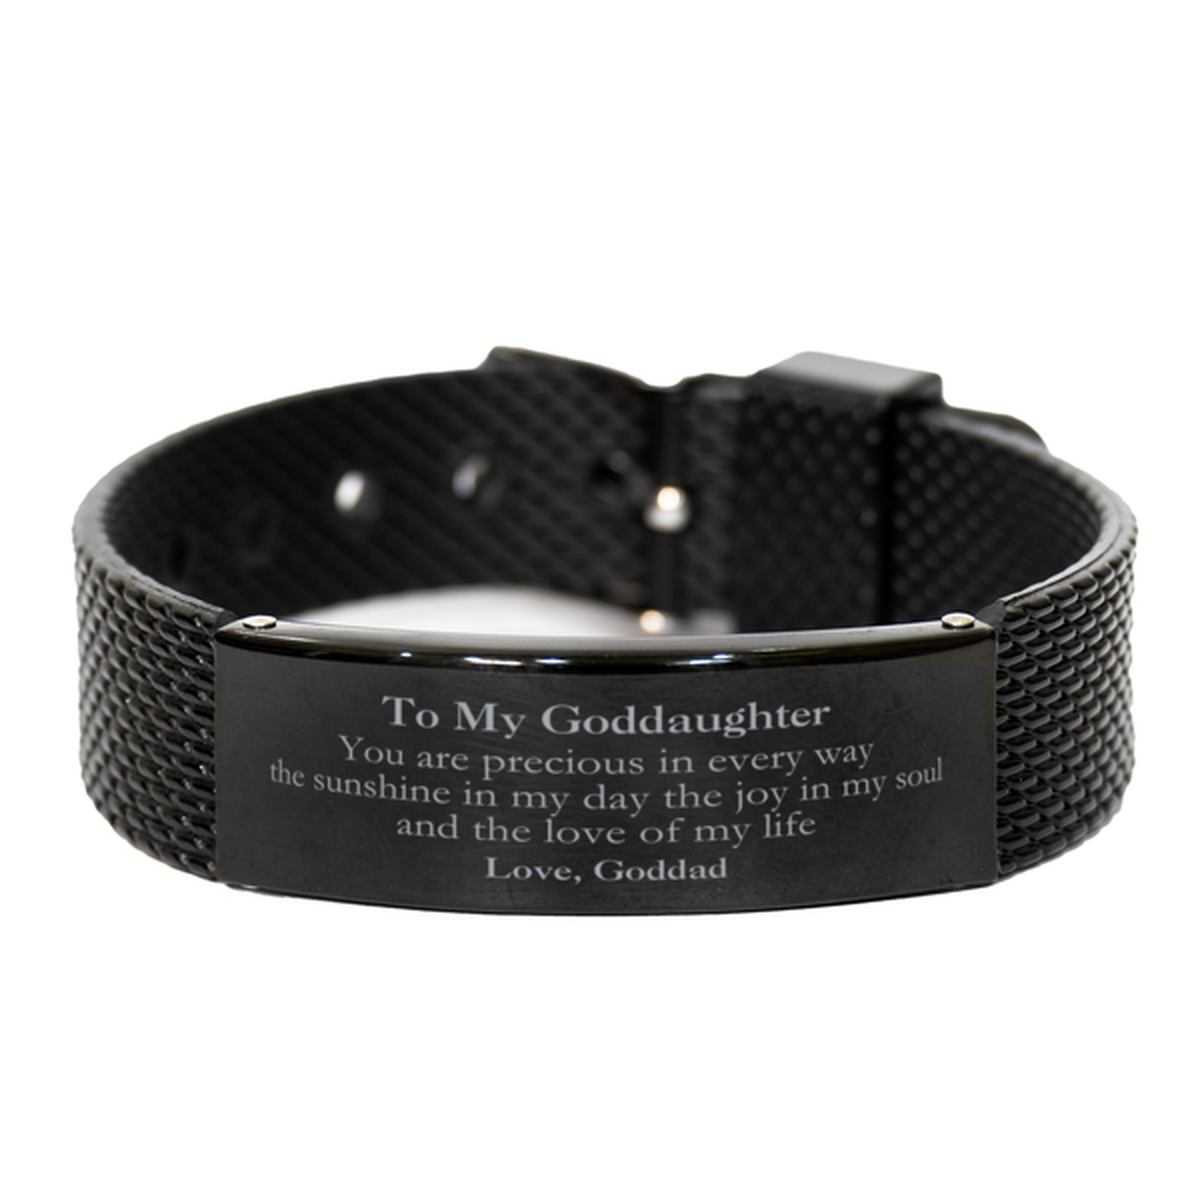 Graduation Gifts for Goddaughter Black Shark Mesh Bracelet Present from Goddad, Christmas Goddaughter Birthday Gifts Goddaughter You are precious in every way the sunshine in my day. Love, Goddad